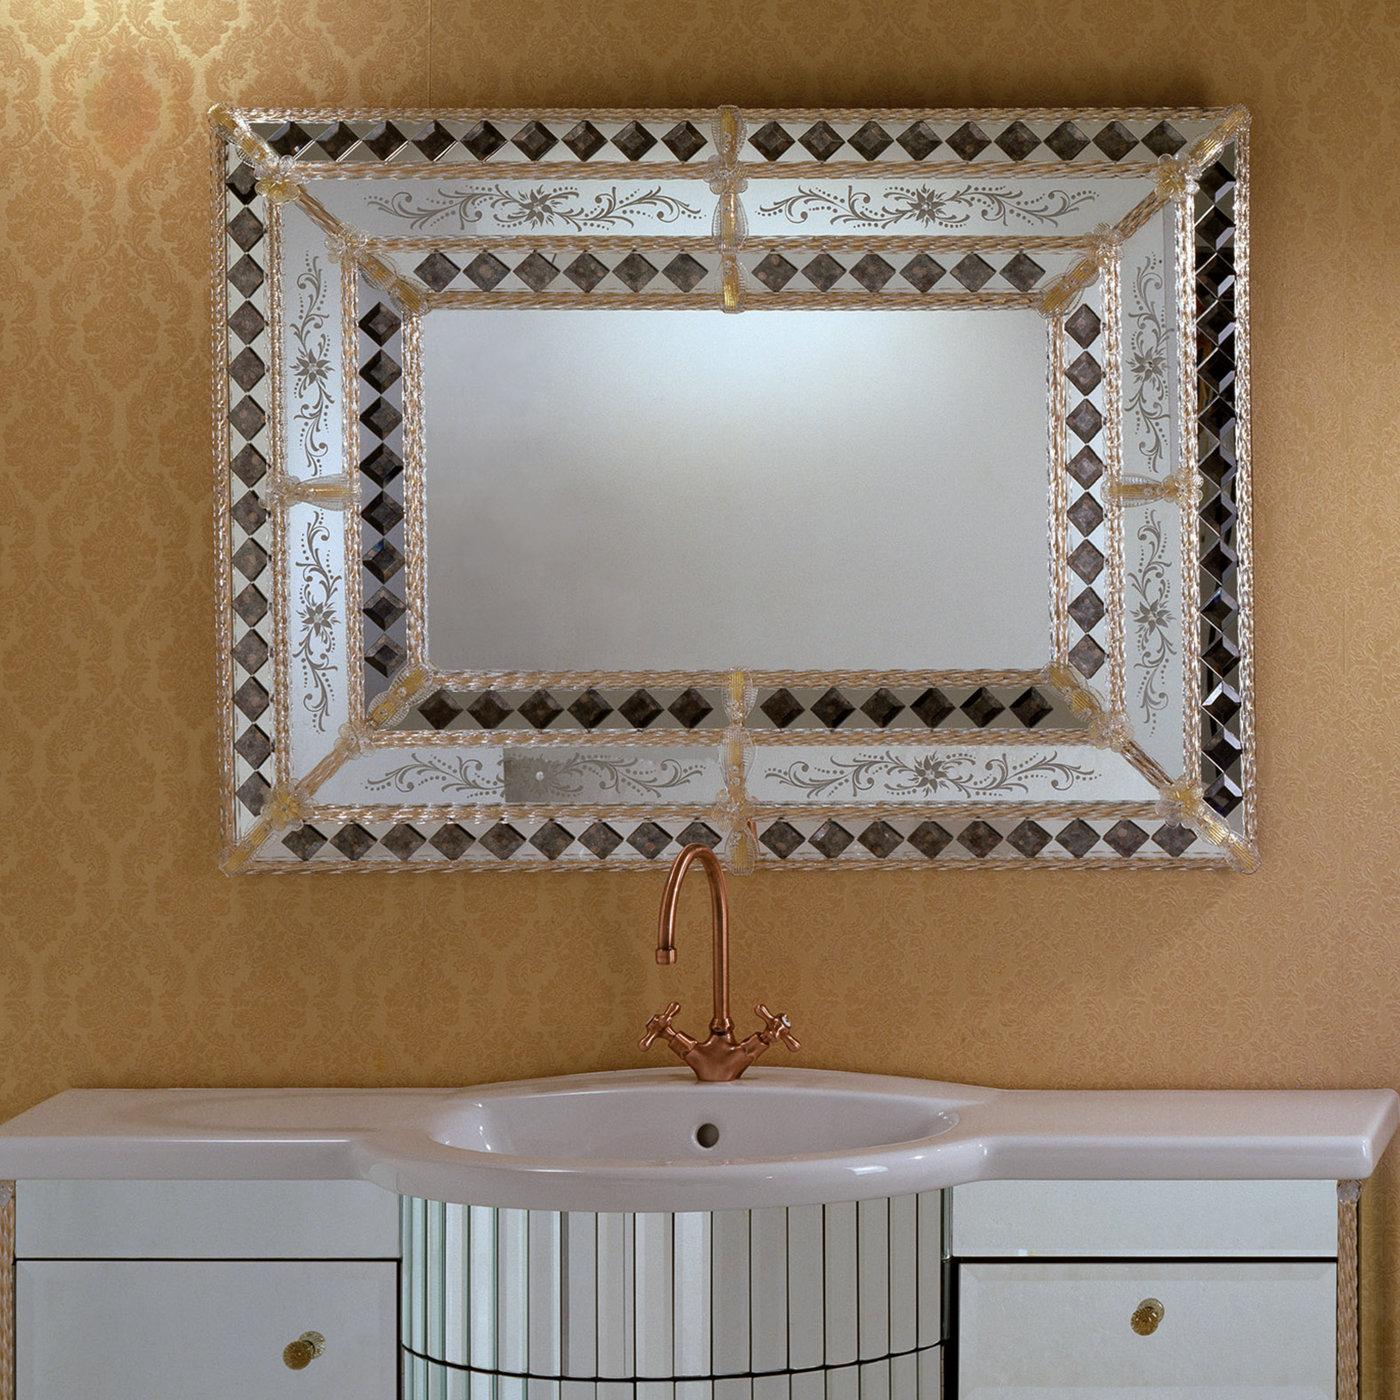 Painstakingly handcrafted by master glassmakers following traditional techniques, this opulent mirror will splendidly complement a classic console or bathroom. The wide frame in mirrored glass is accented with golden flowers in Murano glass